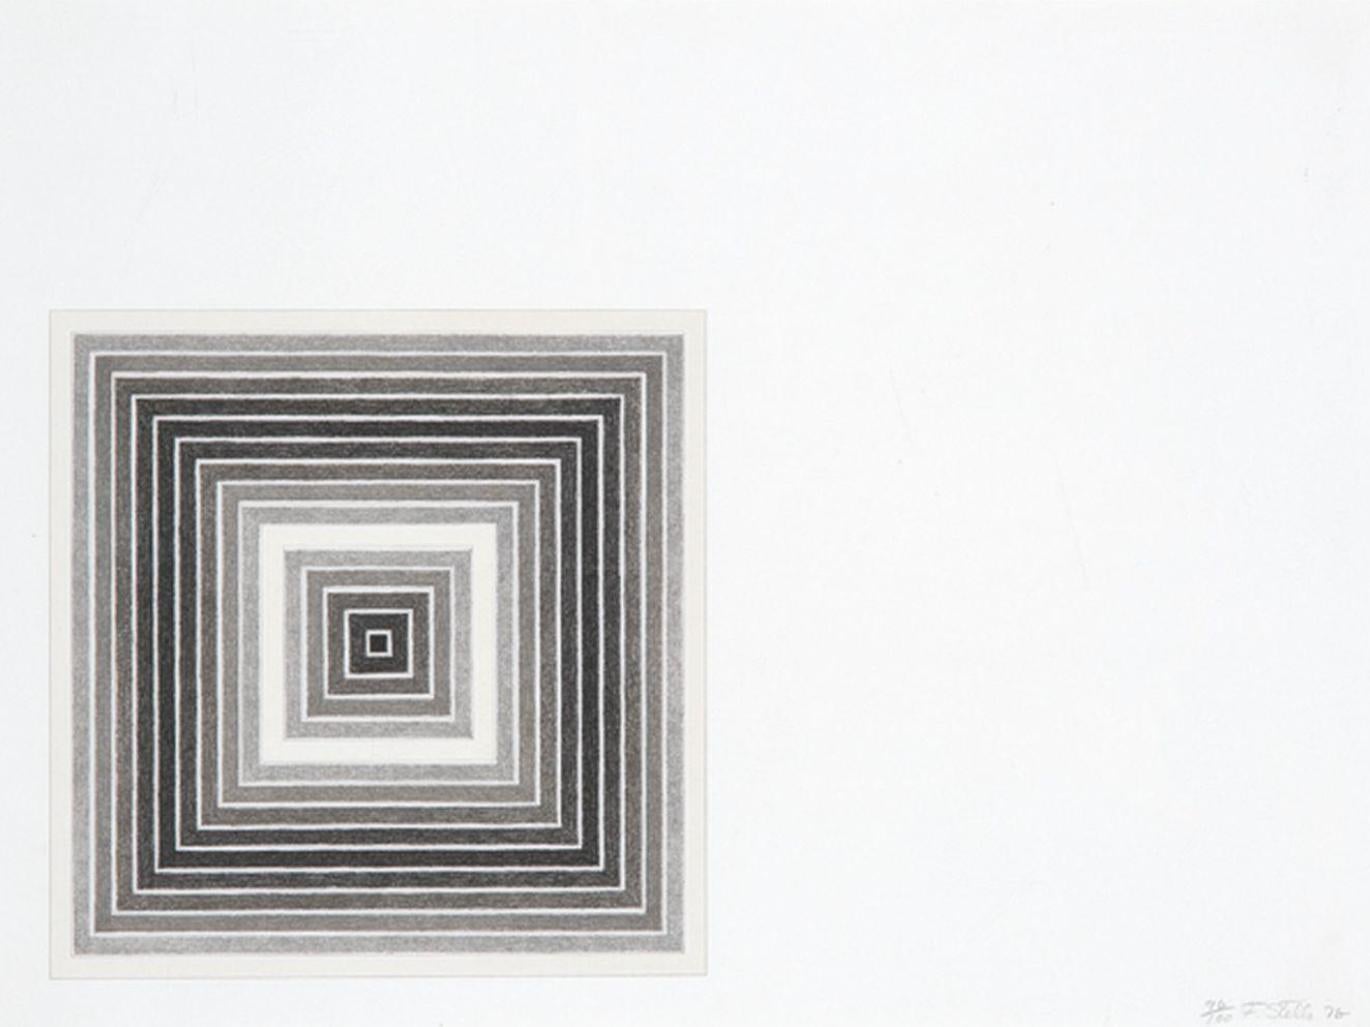 FRANK STELLA (1936-Present)

Lithograph on dry-sealed J. Green paper, conceived in 1972. Signed, dated, and numbered 96/100 in graphite on the lower right. Editing Petersburg Press Ltd, London 1972 

PROVENANCE (back label) 
Pace Prints, New York